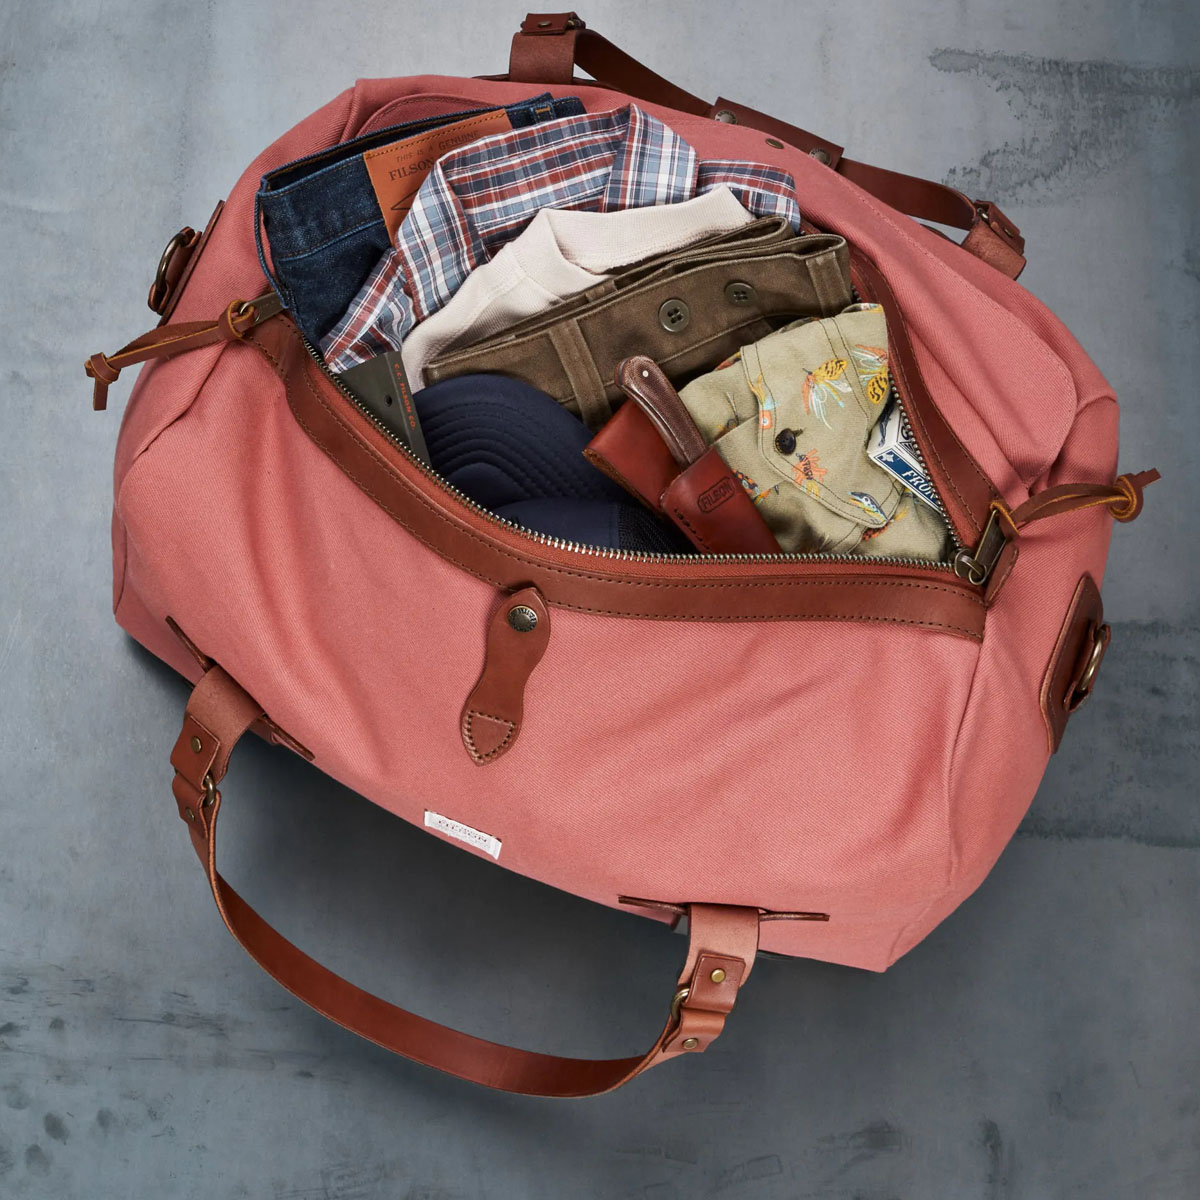 Filson Rugged Twill Duffle Bag Medium Cedar Red, perfect for a weekend away or a small business-trip